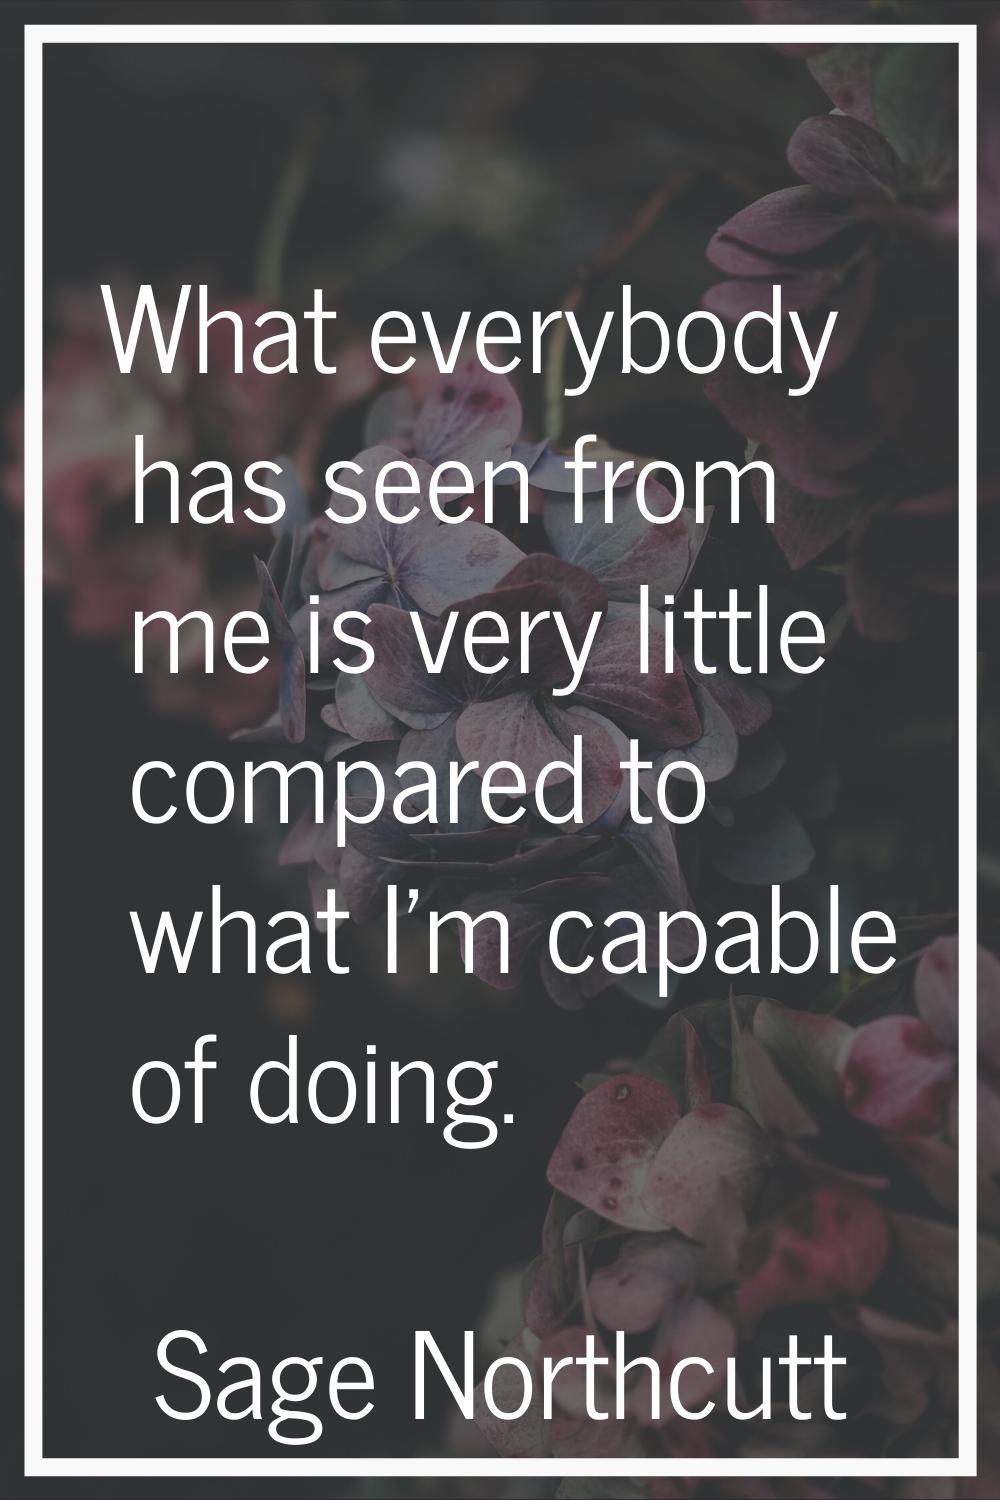 What everybody has seen from me is very little compared to what I'm capable of doing.